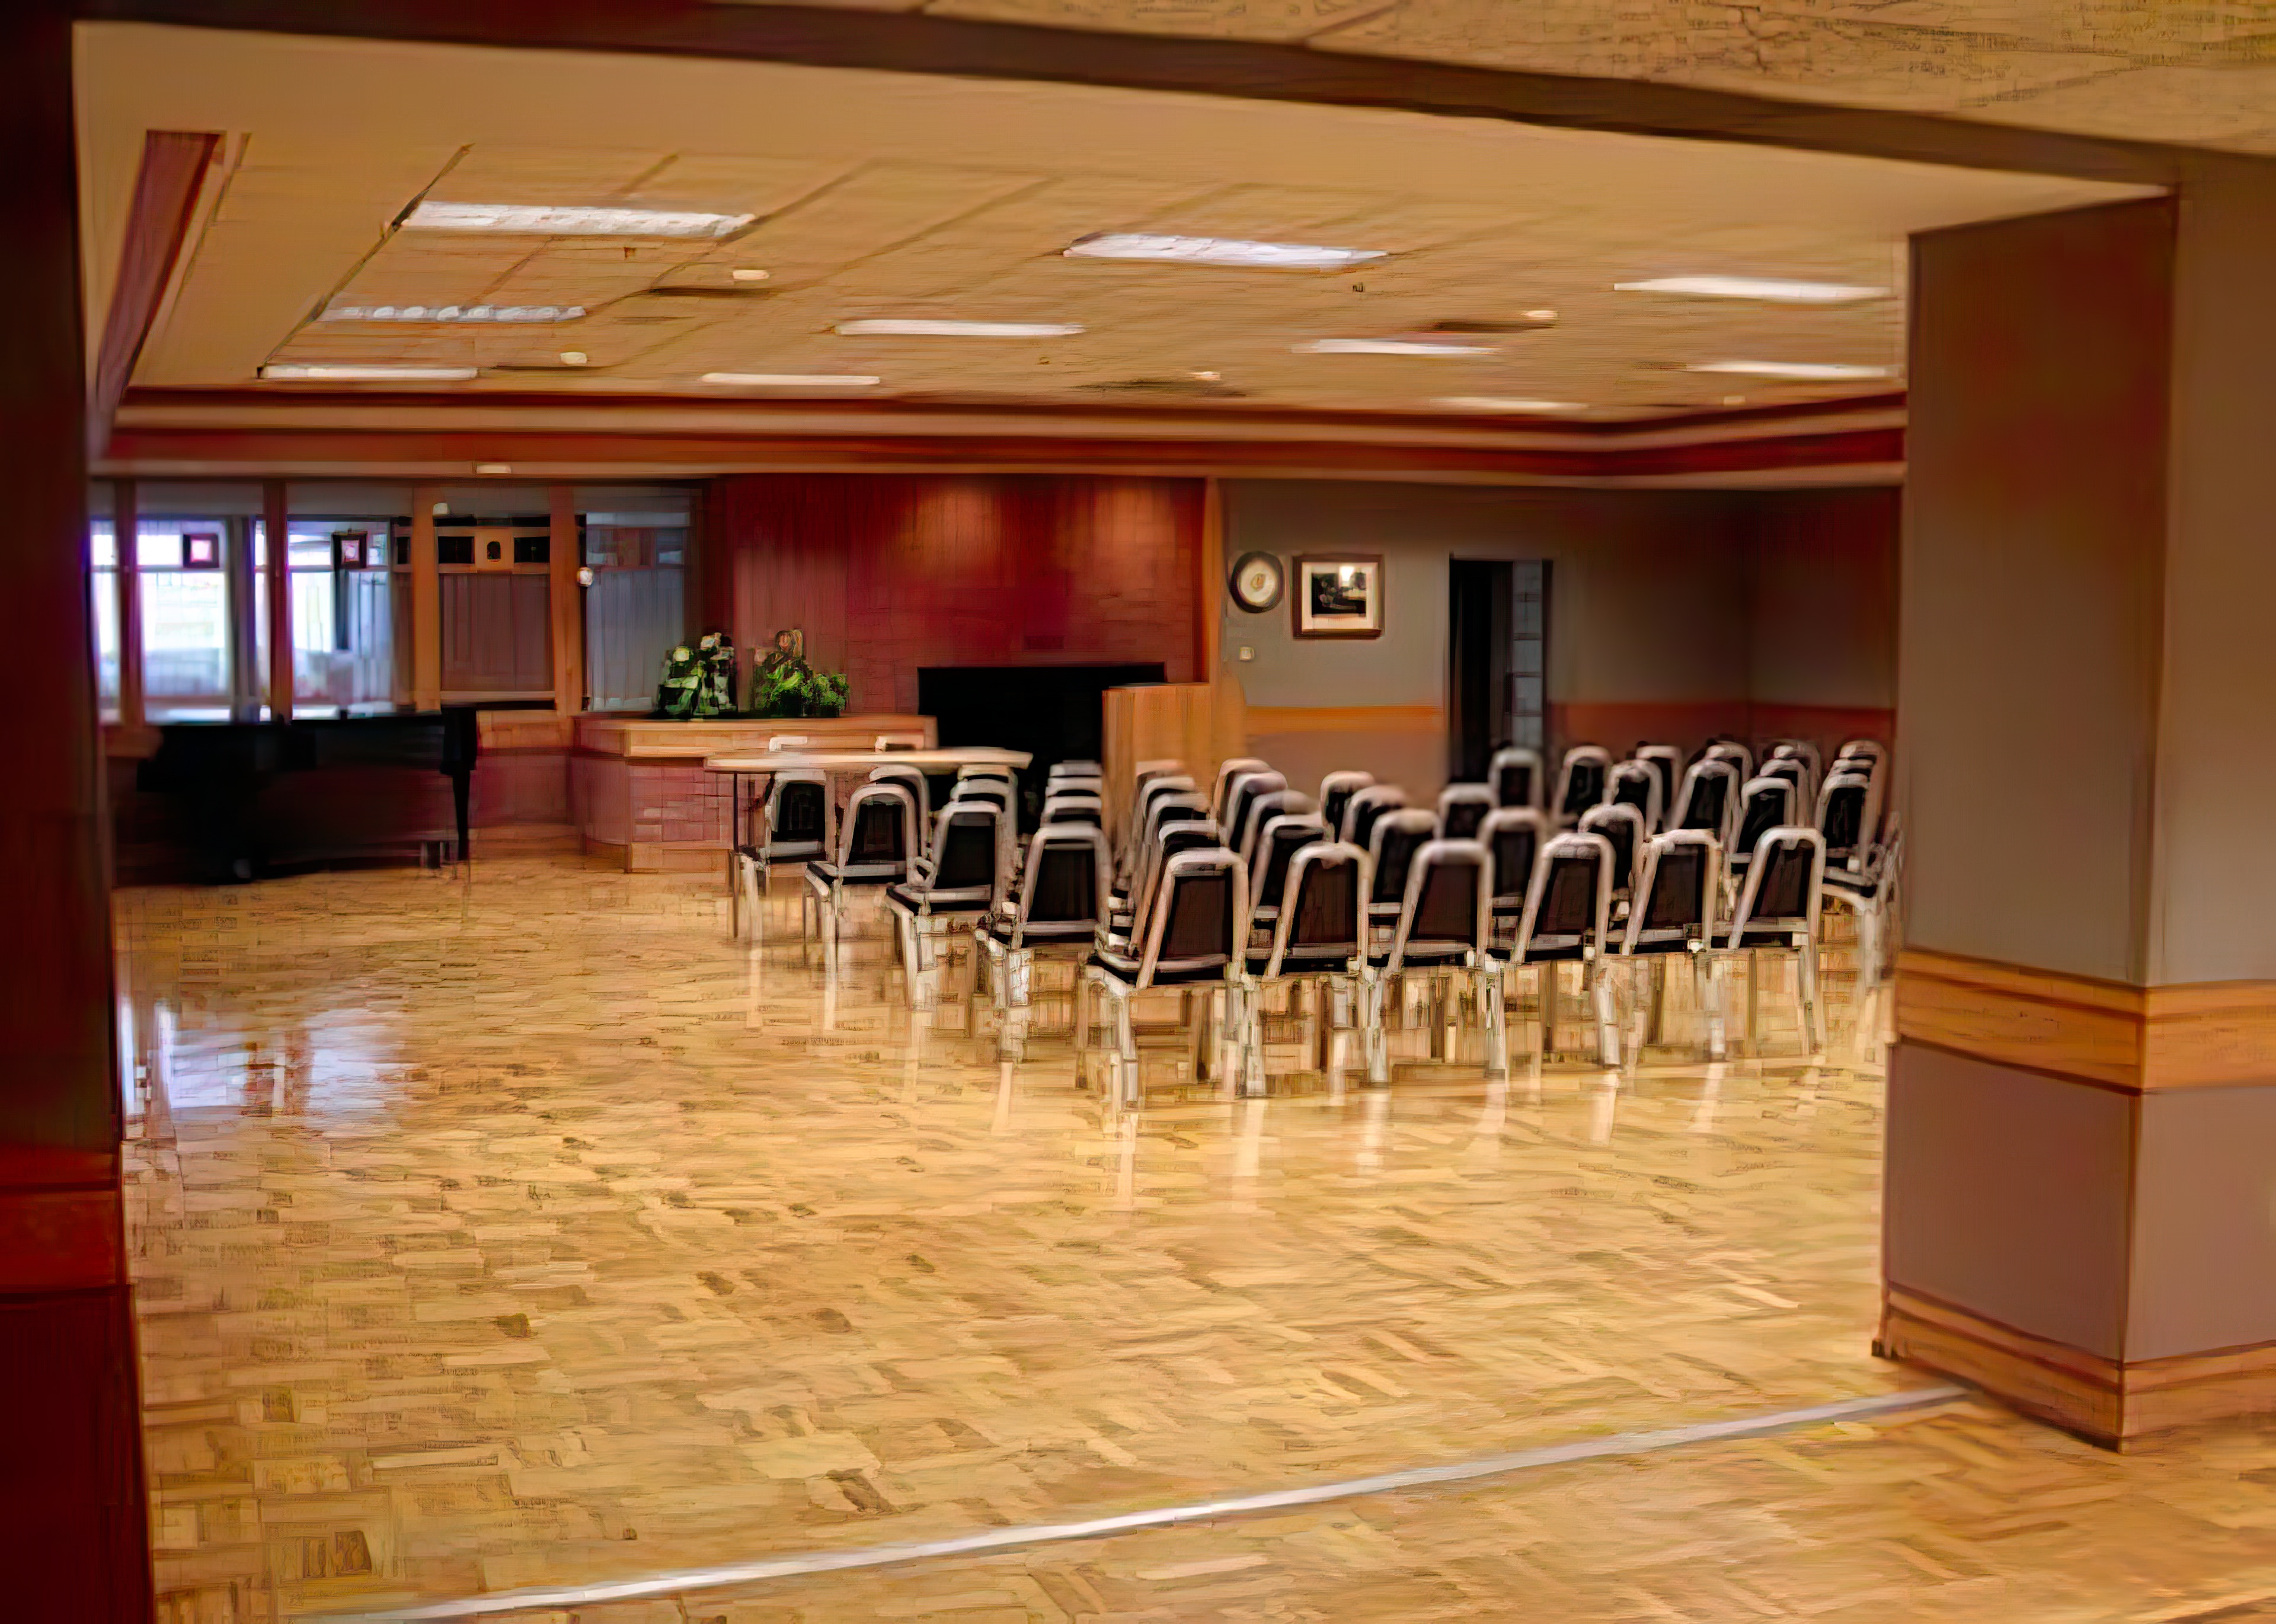 A spacious room with glossy parquet flooring. Rows of chairs face a speakers podium.